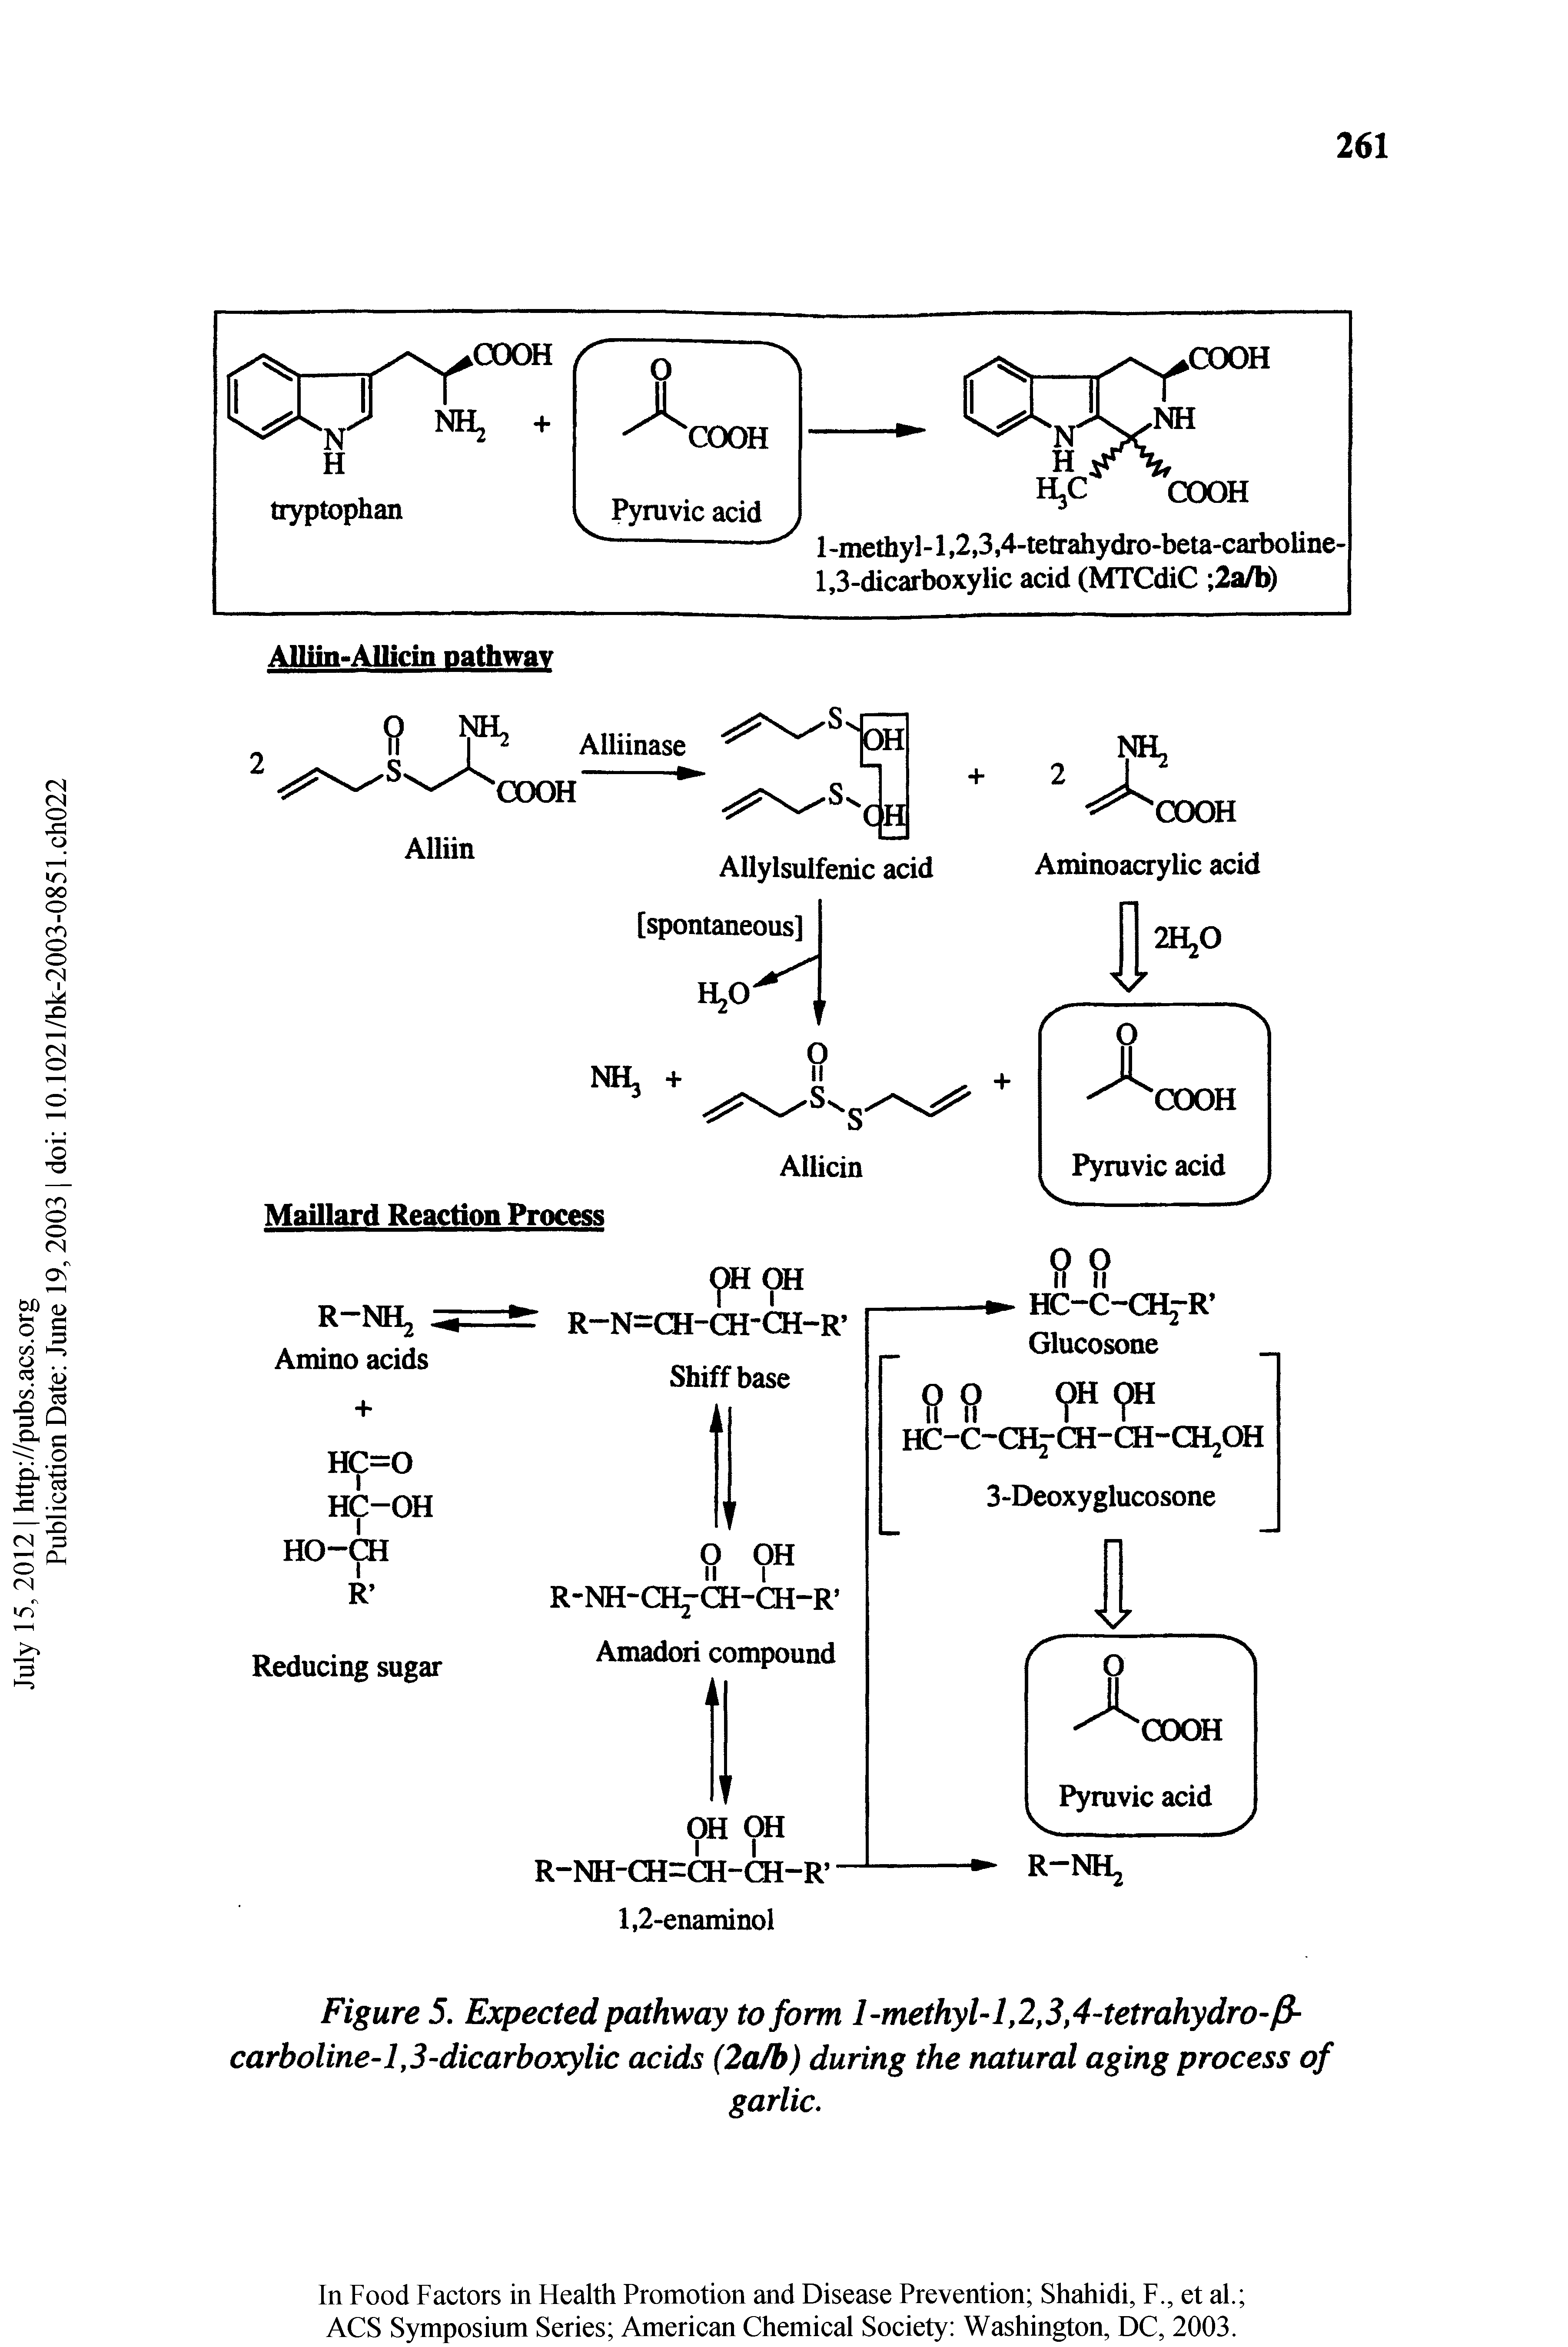 Figure 5, Expected pathway to form 1-methyl-1,2,3,4-tetrahydrO j3-carboline-l,3-dicarboxylic acids (2a/b) during the natural aging process of...